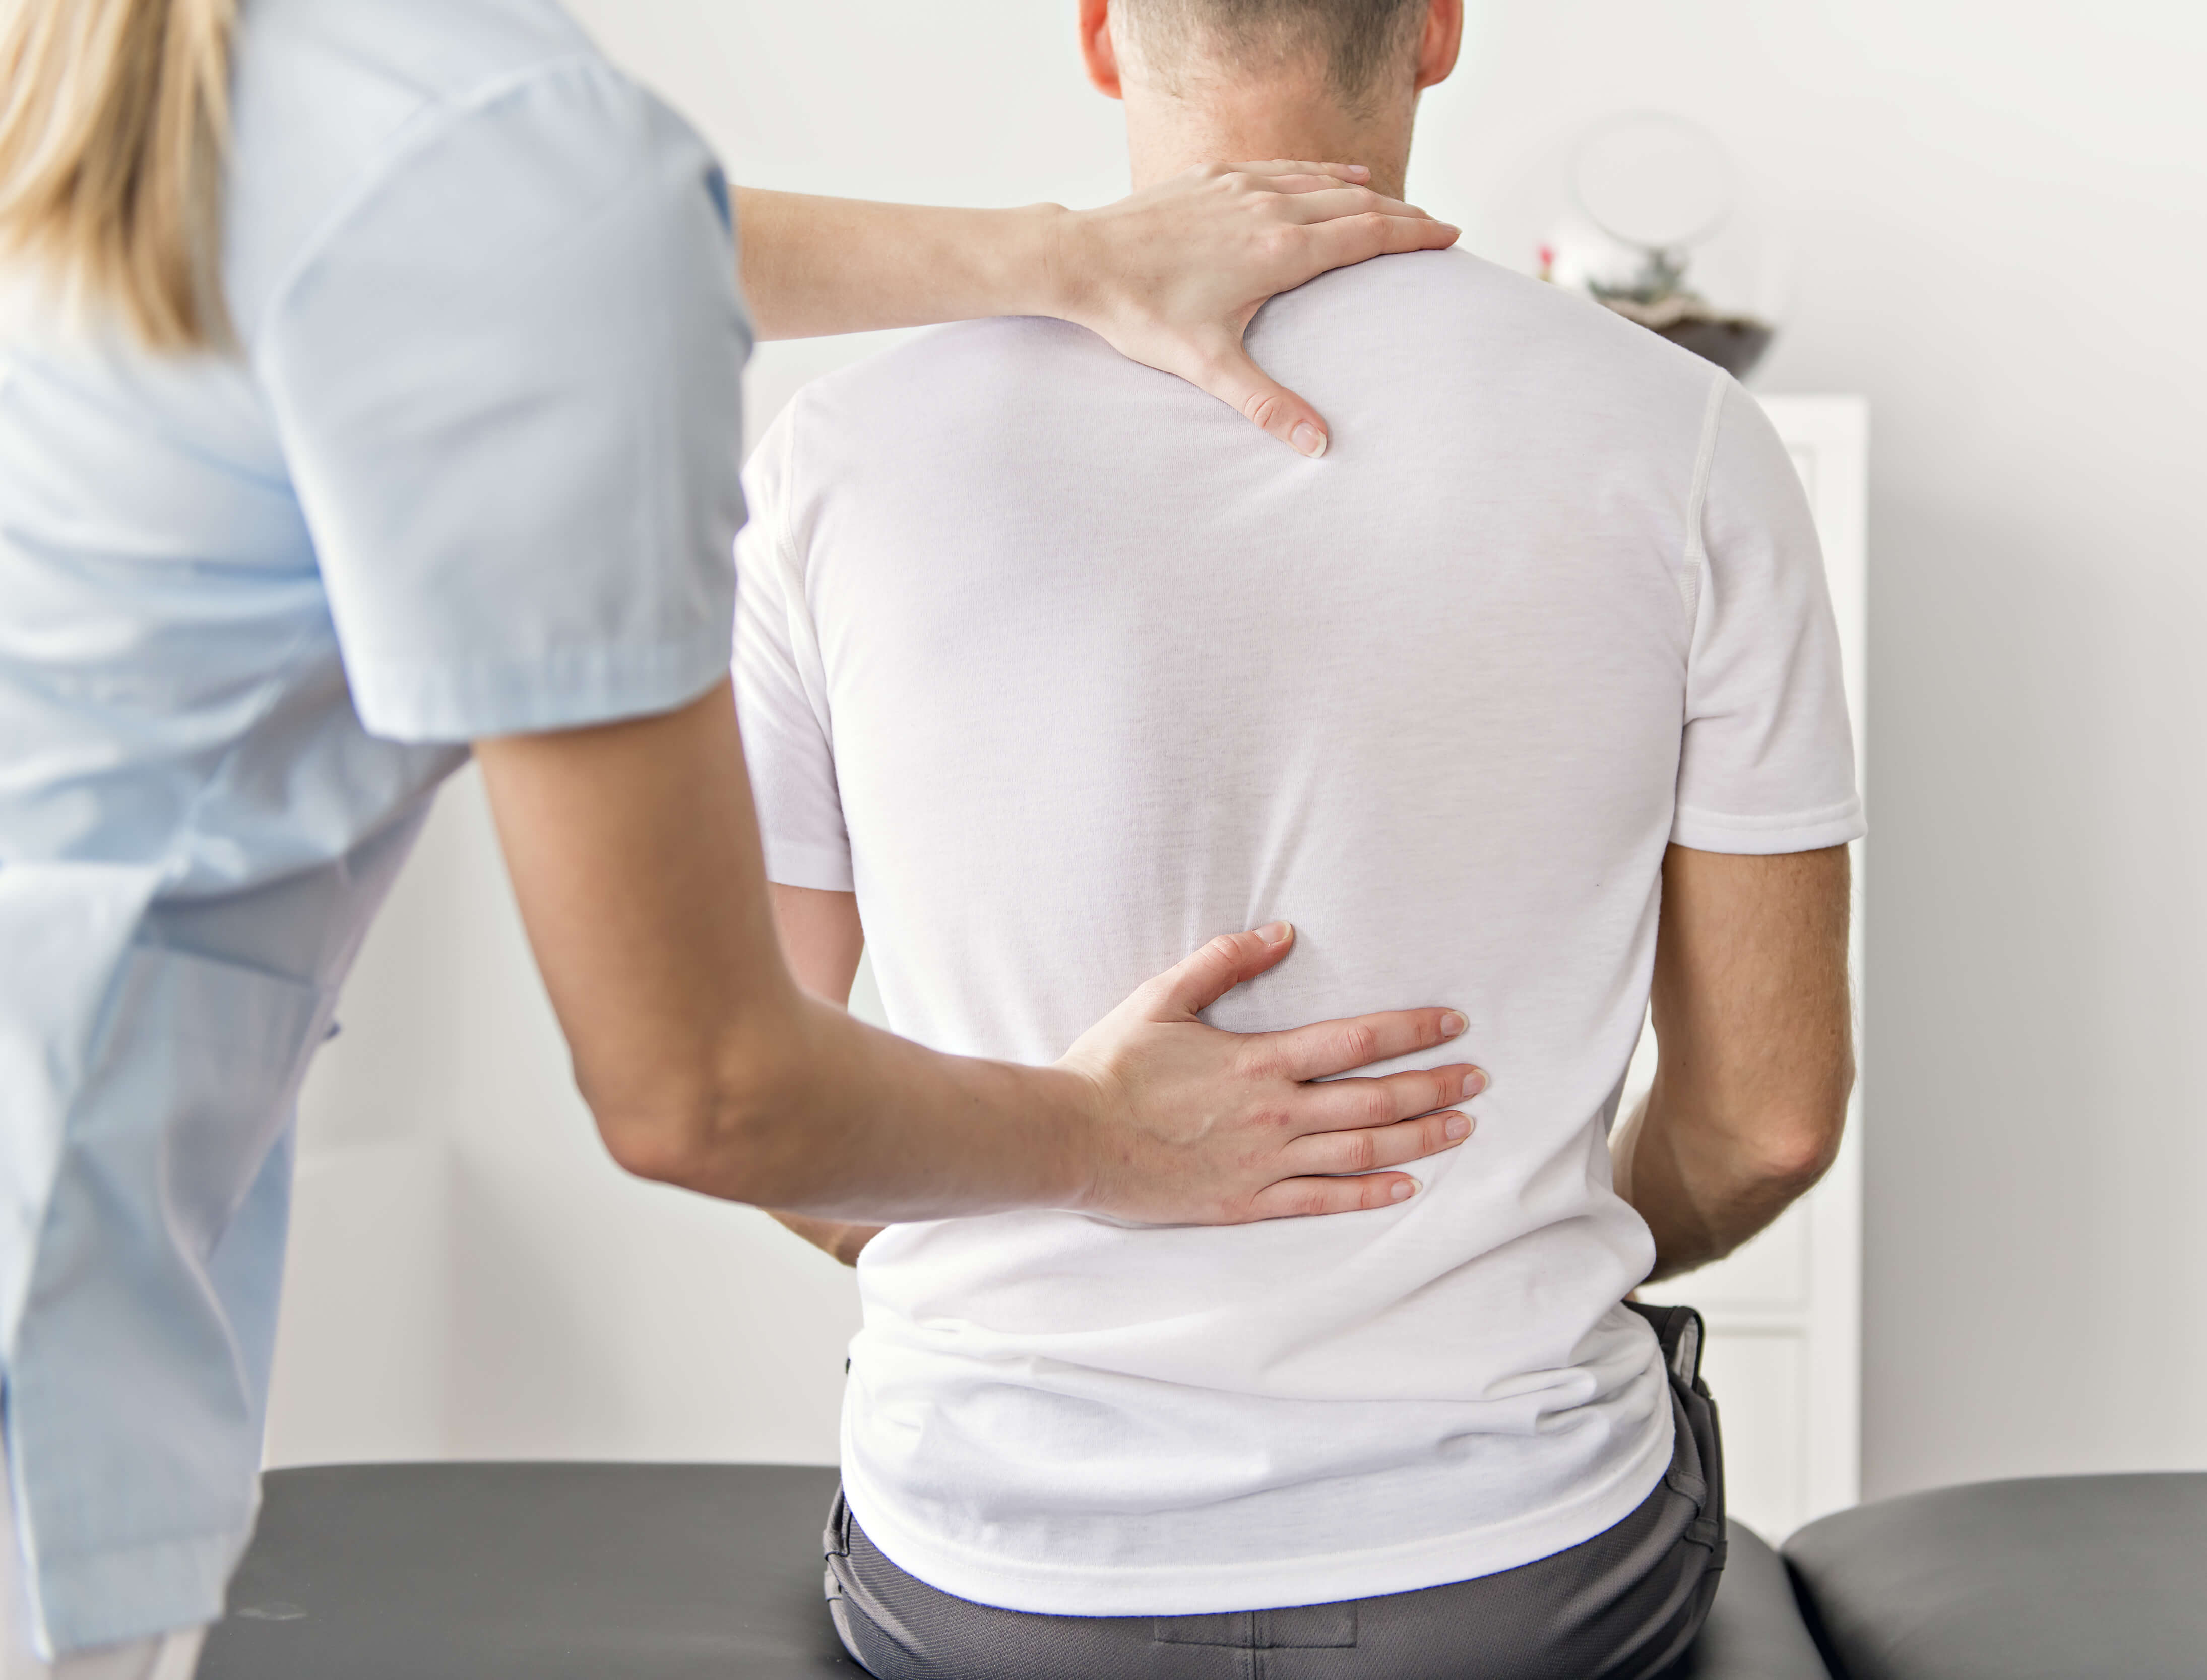 Understand the Causes, Risk Factors, and Treatment for Back Pain